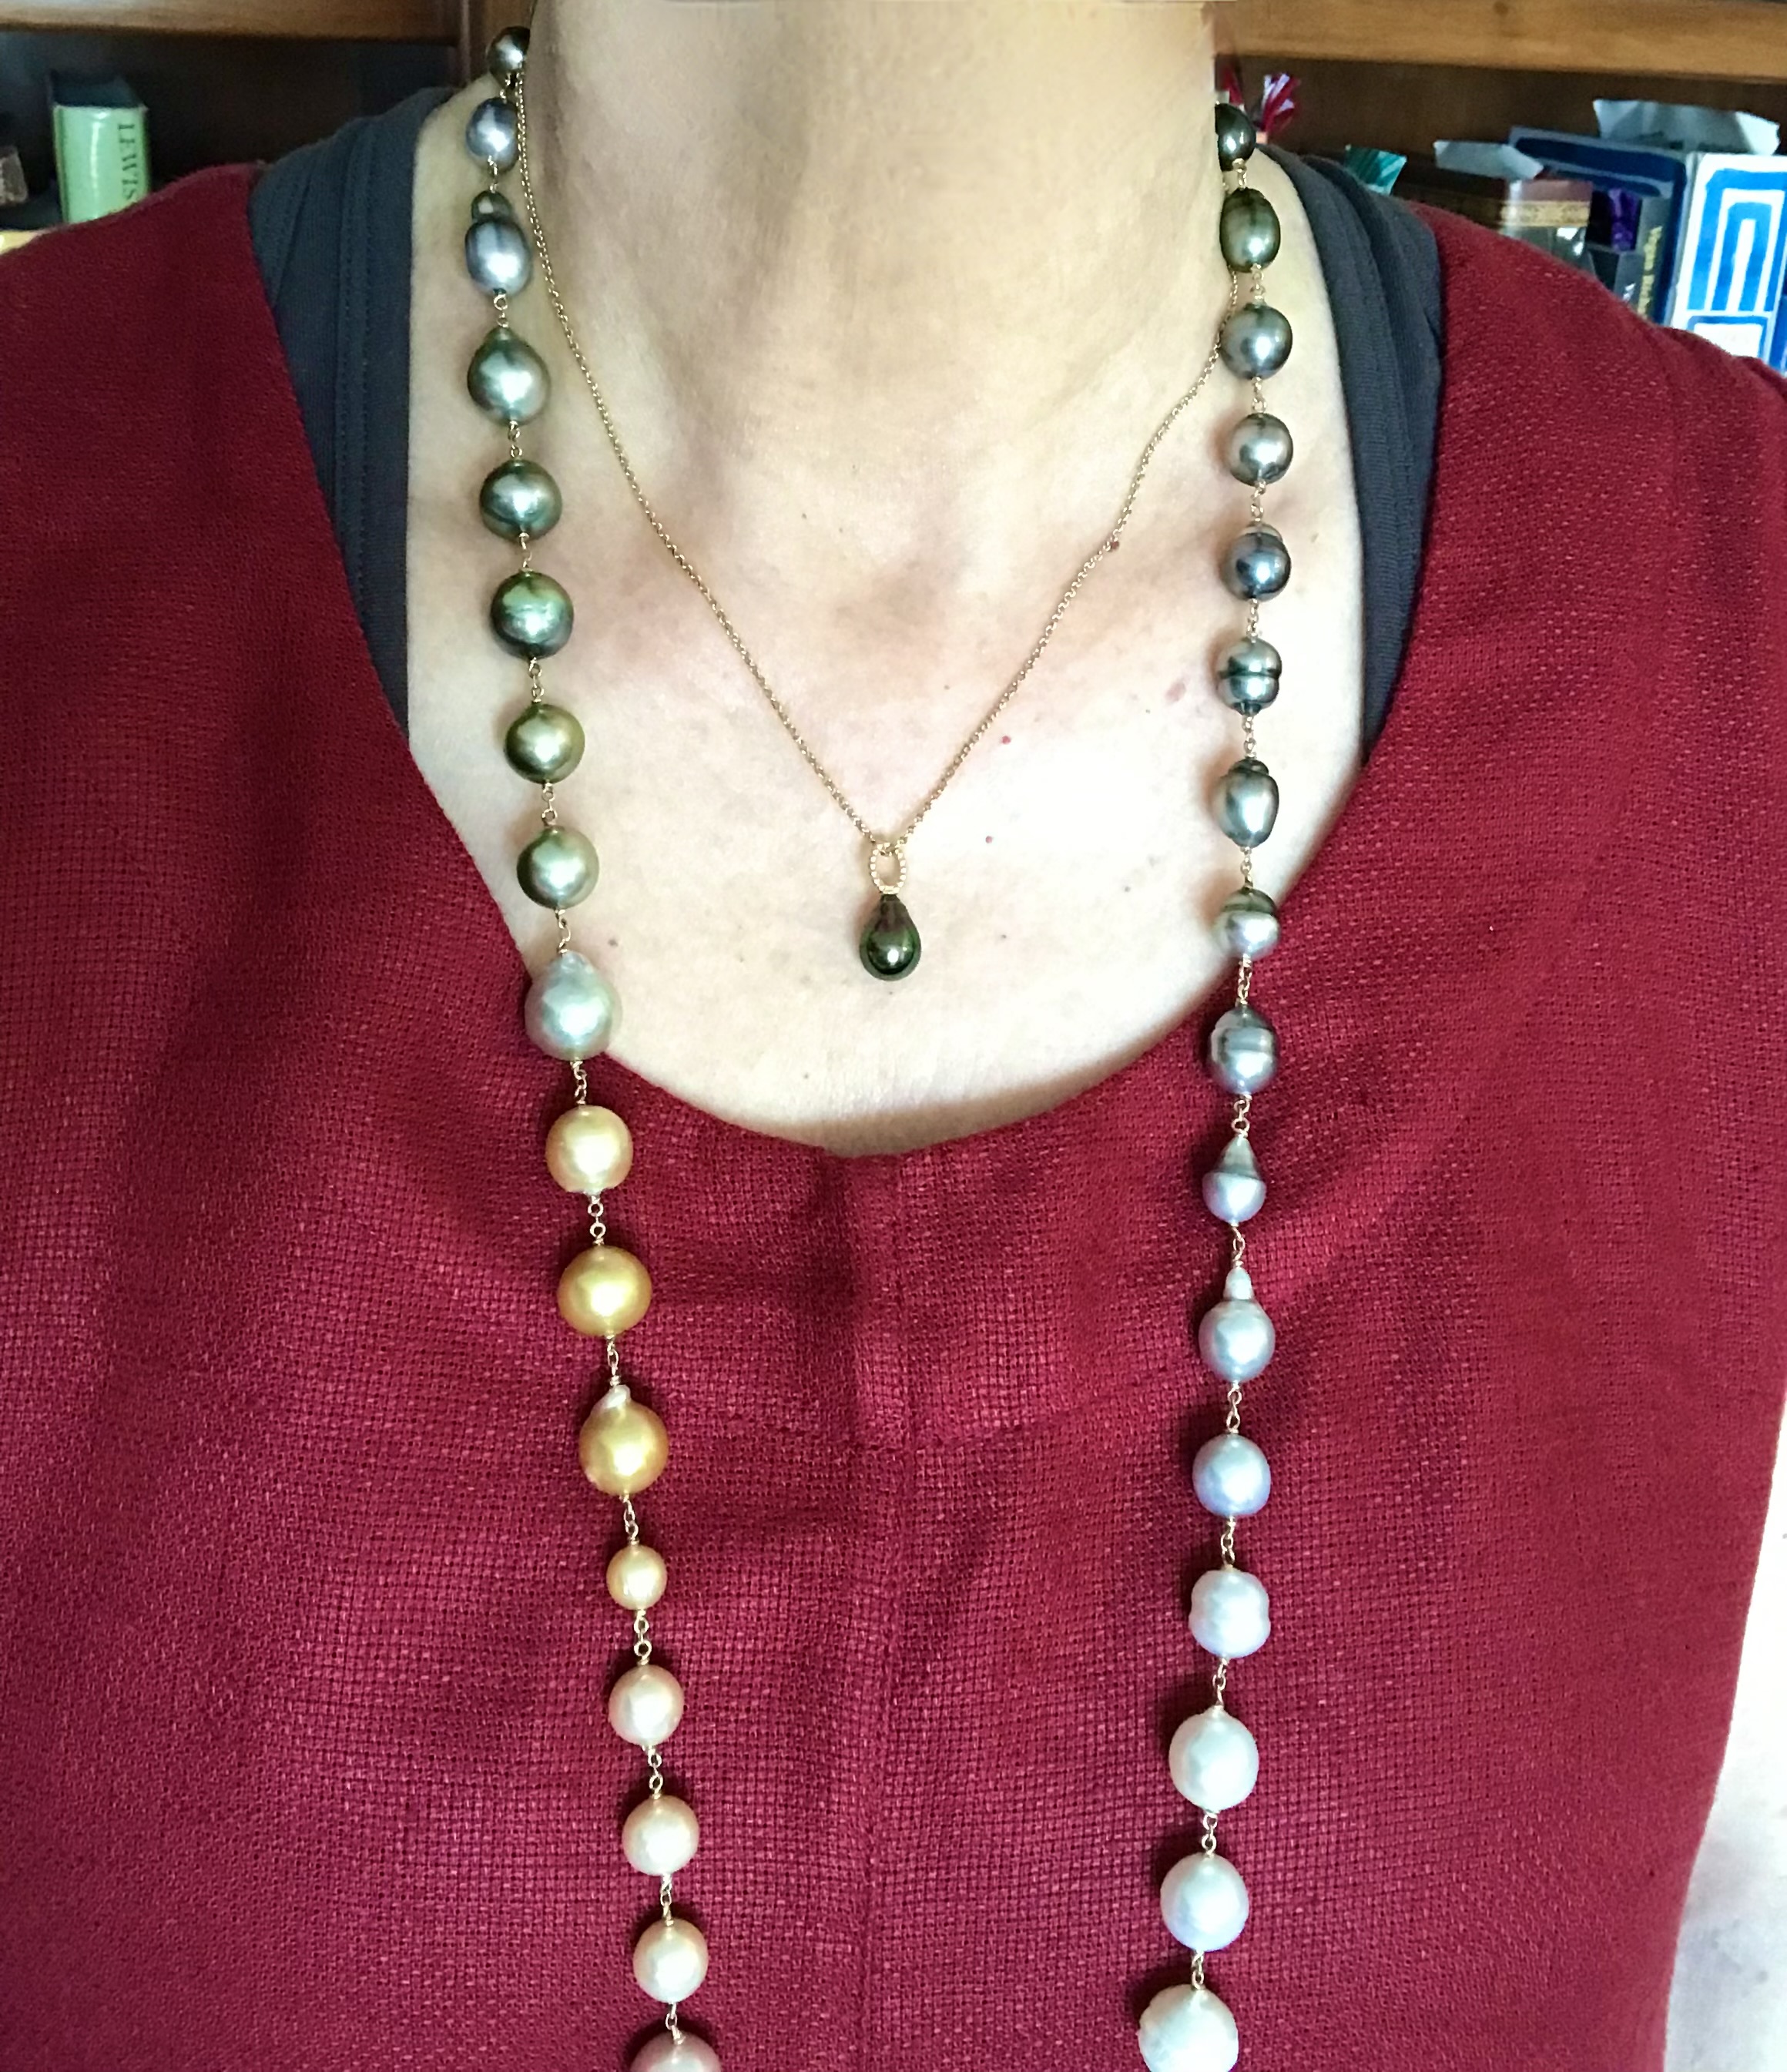  long ombre' tin-cup from Kojima, Worn with my new La Petite Perlagrina and Bali drop earrings from Kamoka